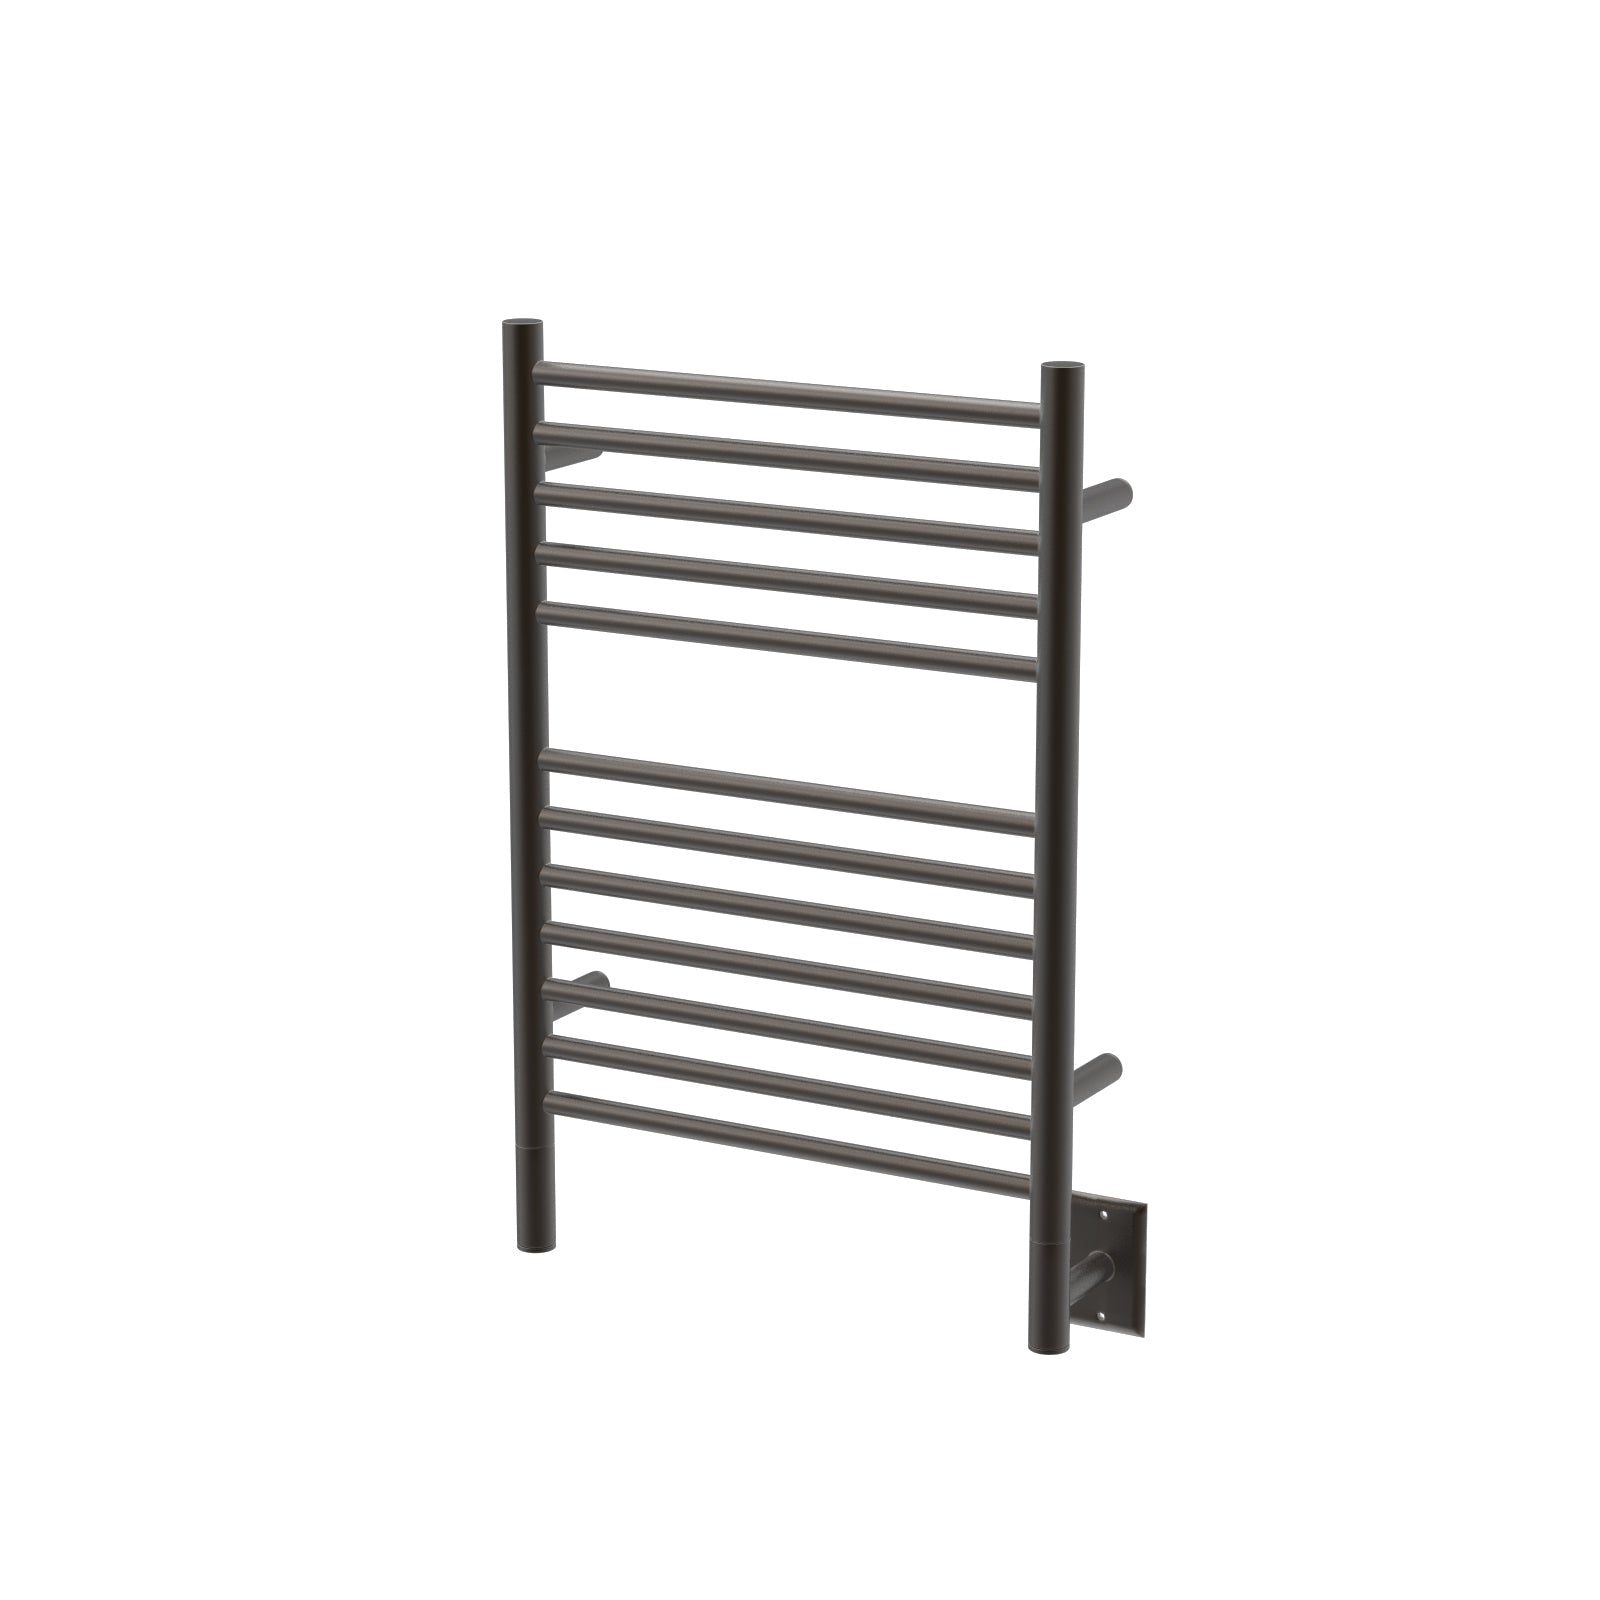 Oil Rubbed Bronze Towel Warmer, Amba Jeeves E Straight, Hardwired, 12 Bars, W 21" H 31"